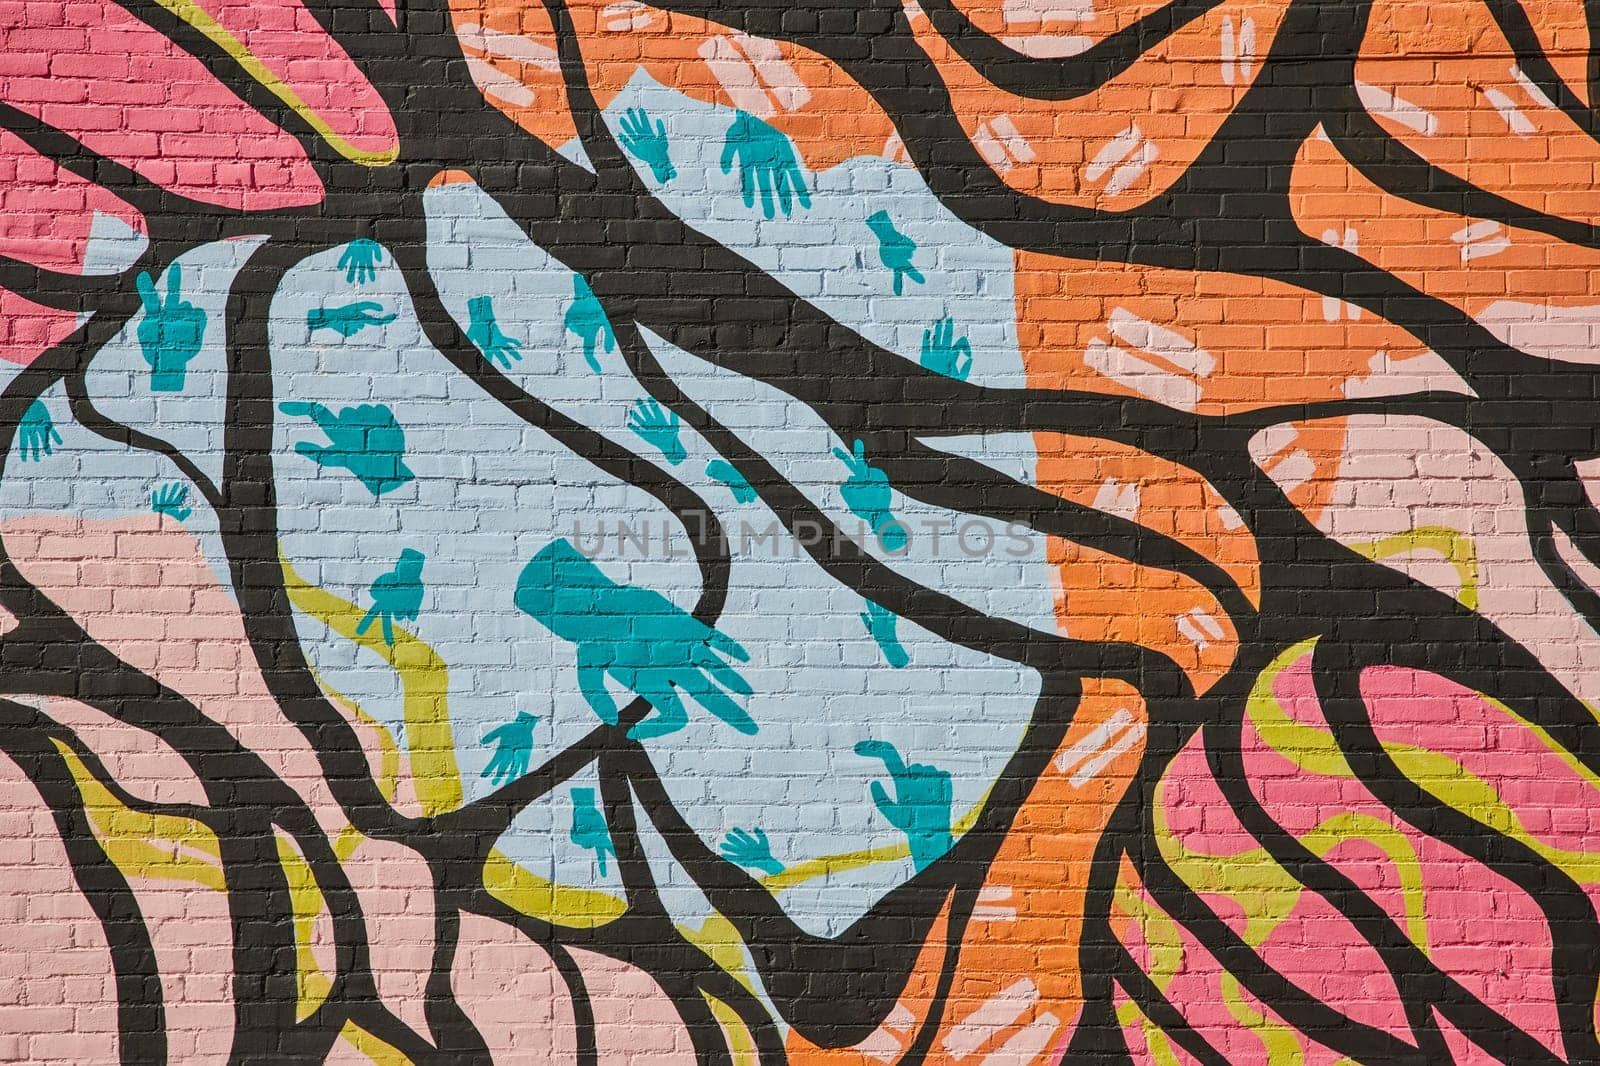 Colorful Urban Mural with Hands and Branches on Brick Wall by njproductions